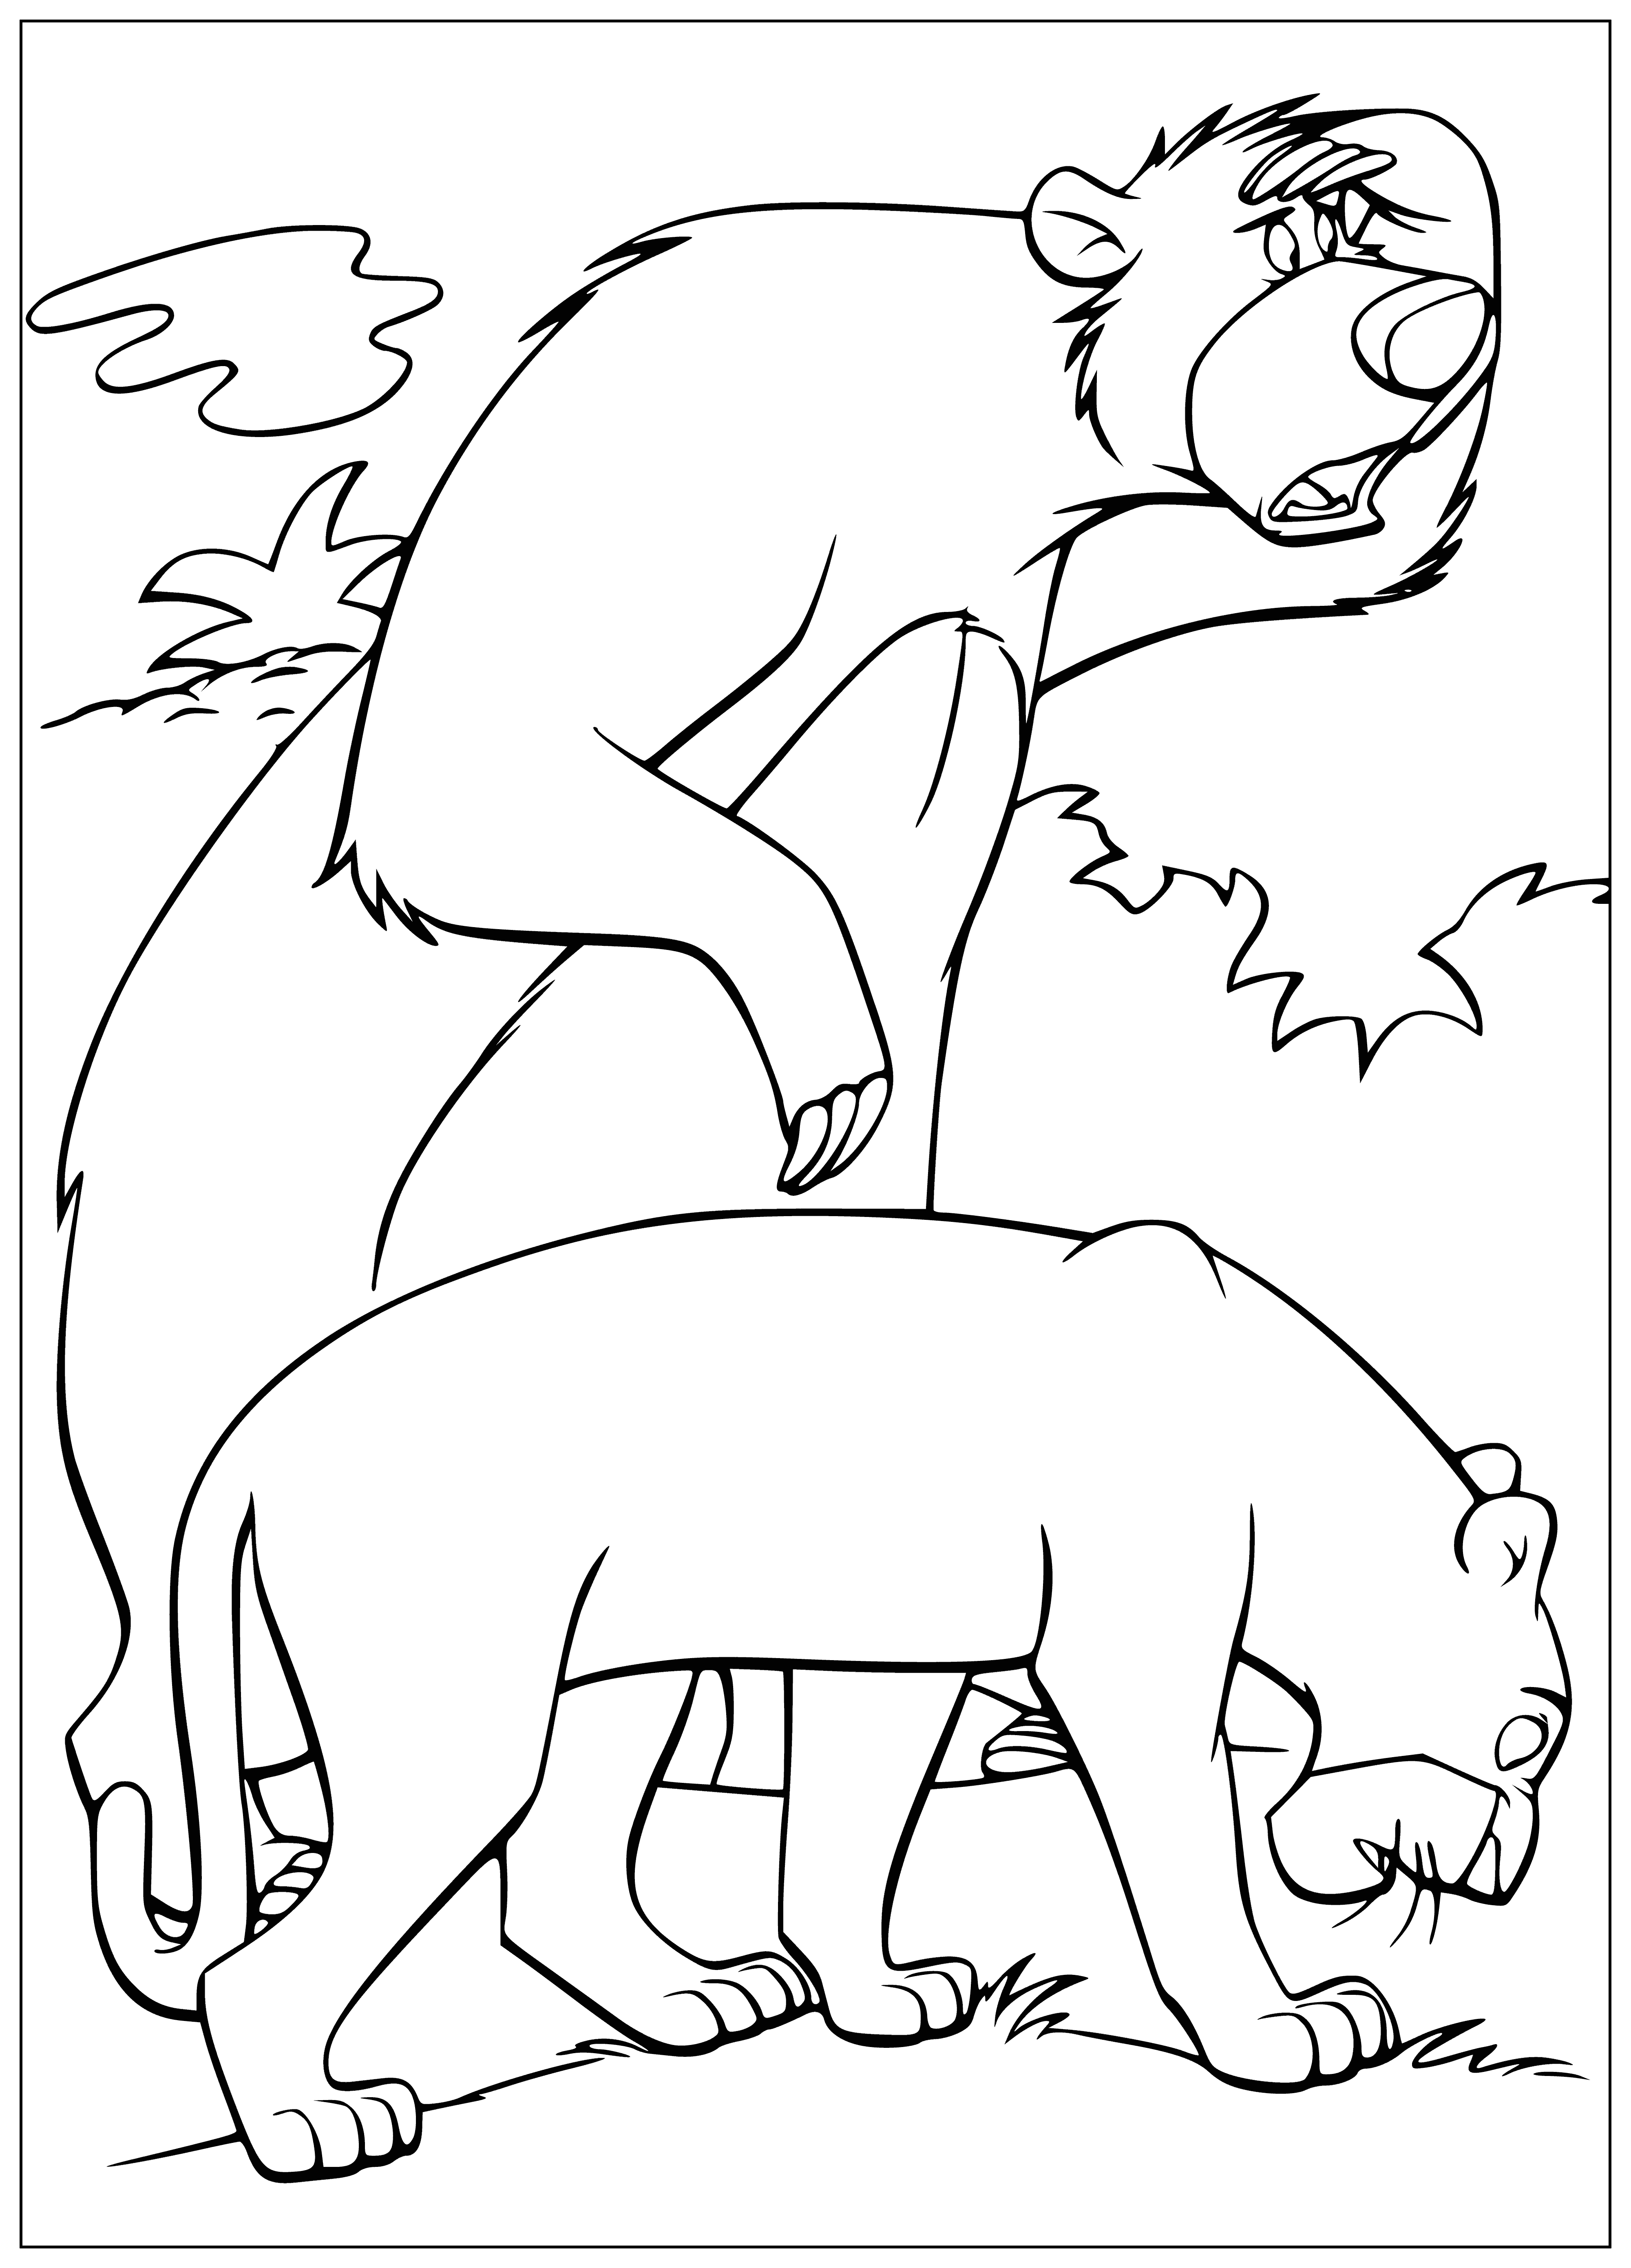 coloring page: Two tigers, Balu & Bagira, eyes closed, in coloring page.